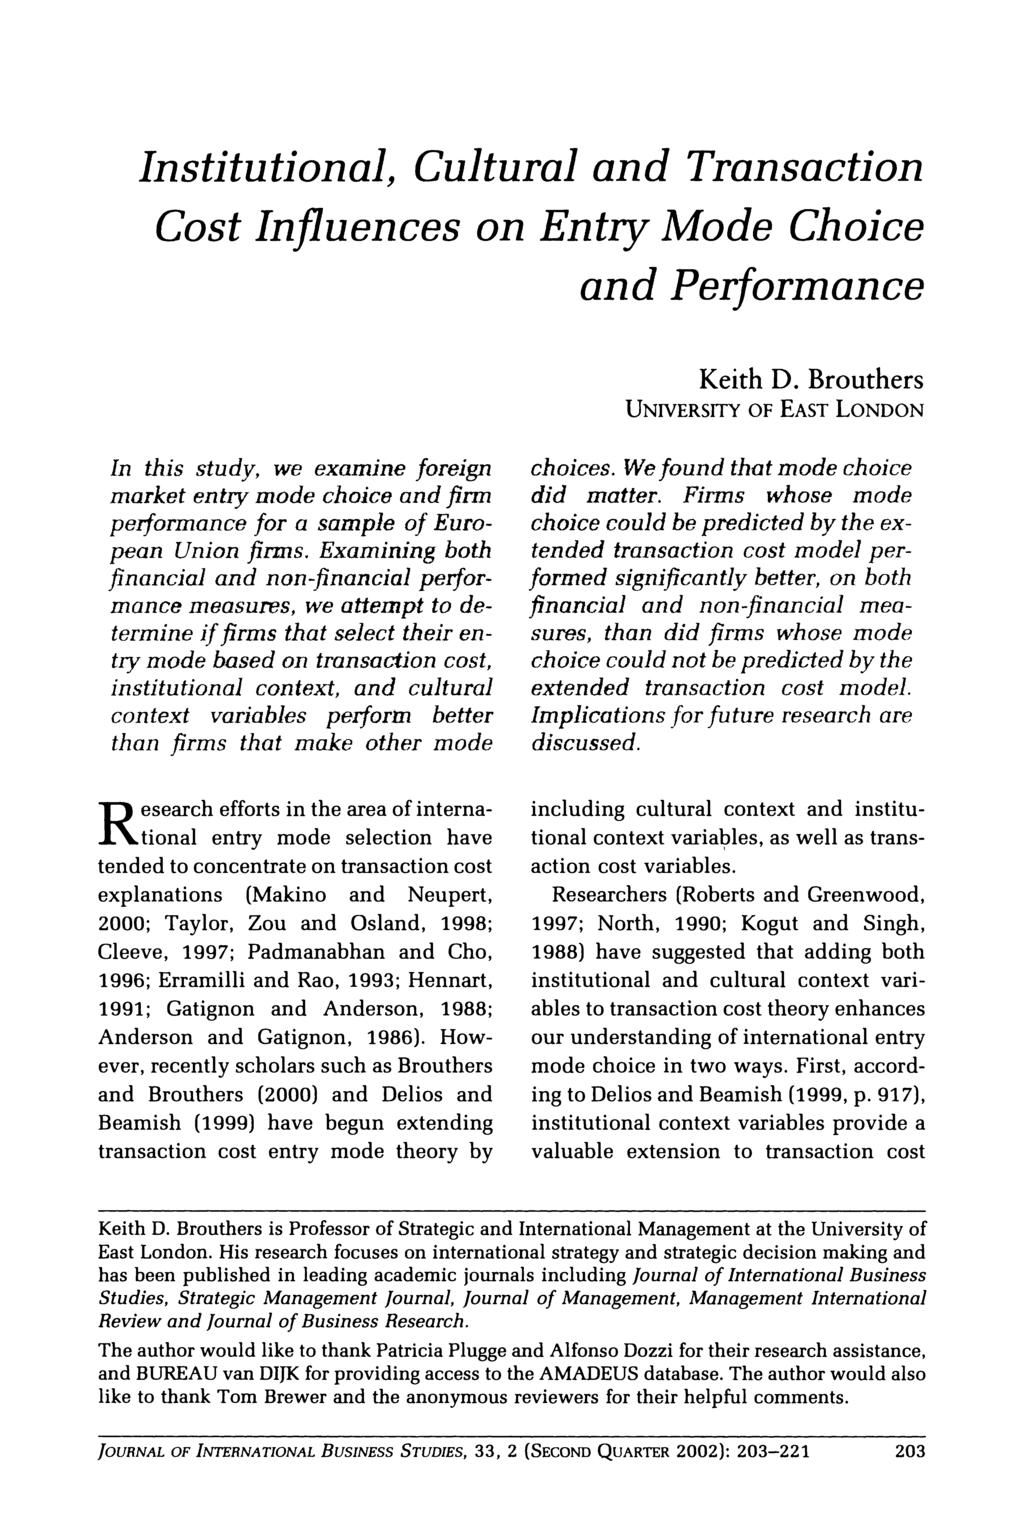 Institutional, Cultural and Transaction Cost Influences on Entry Mode Choice and Performance Keith D.